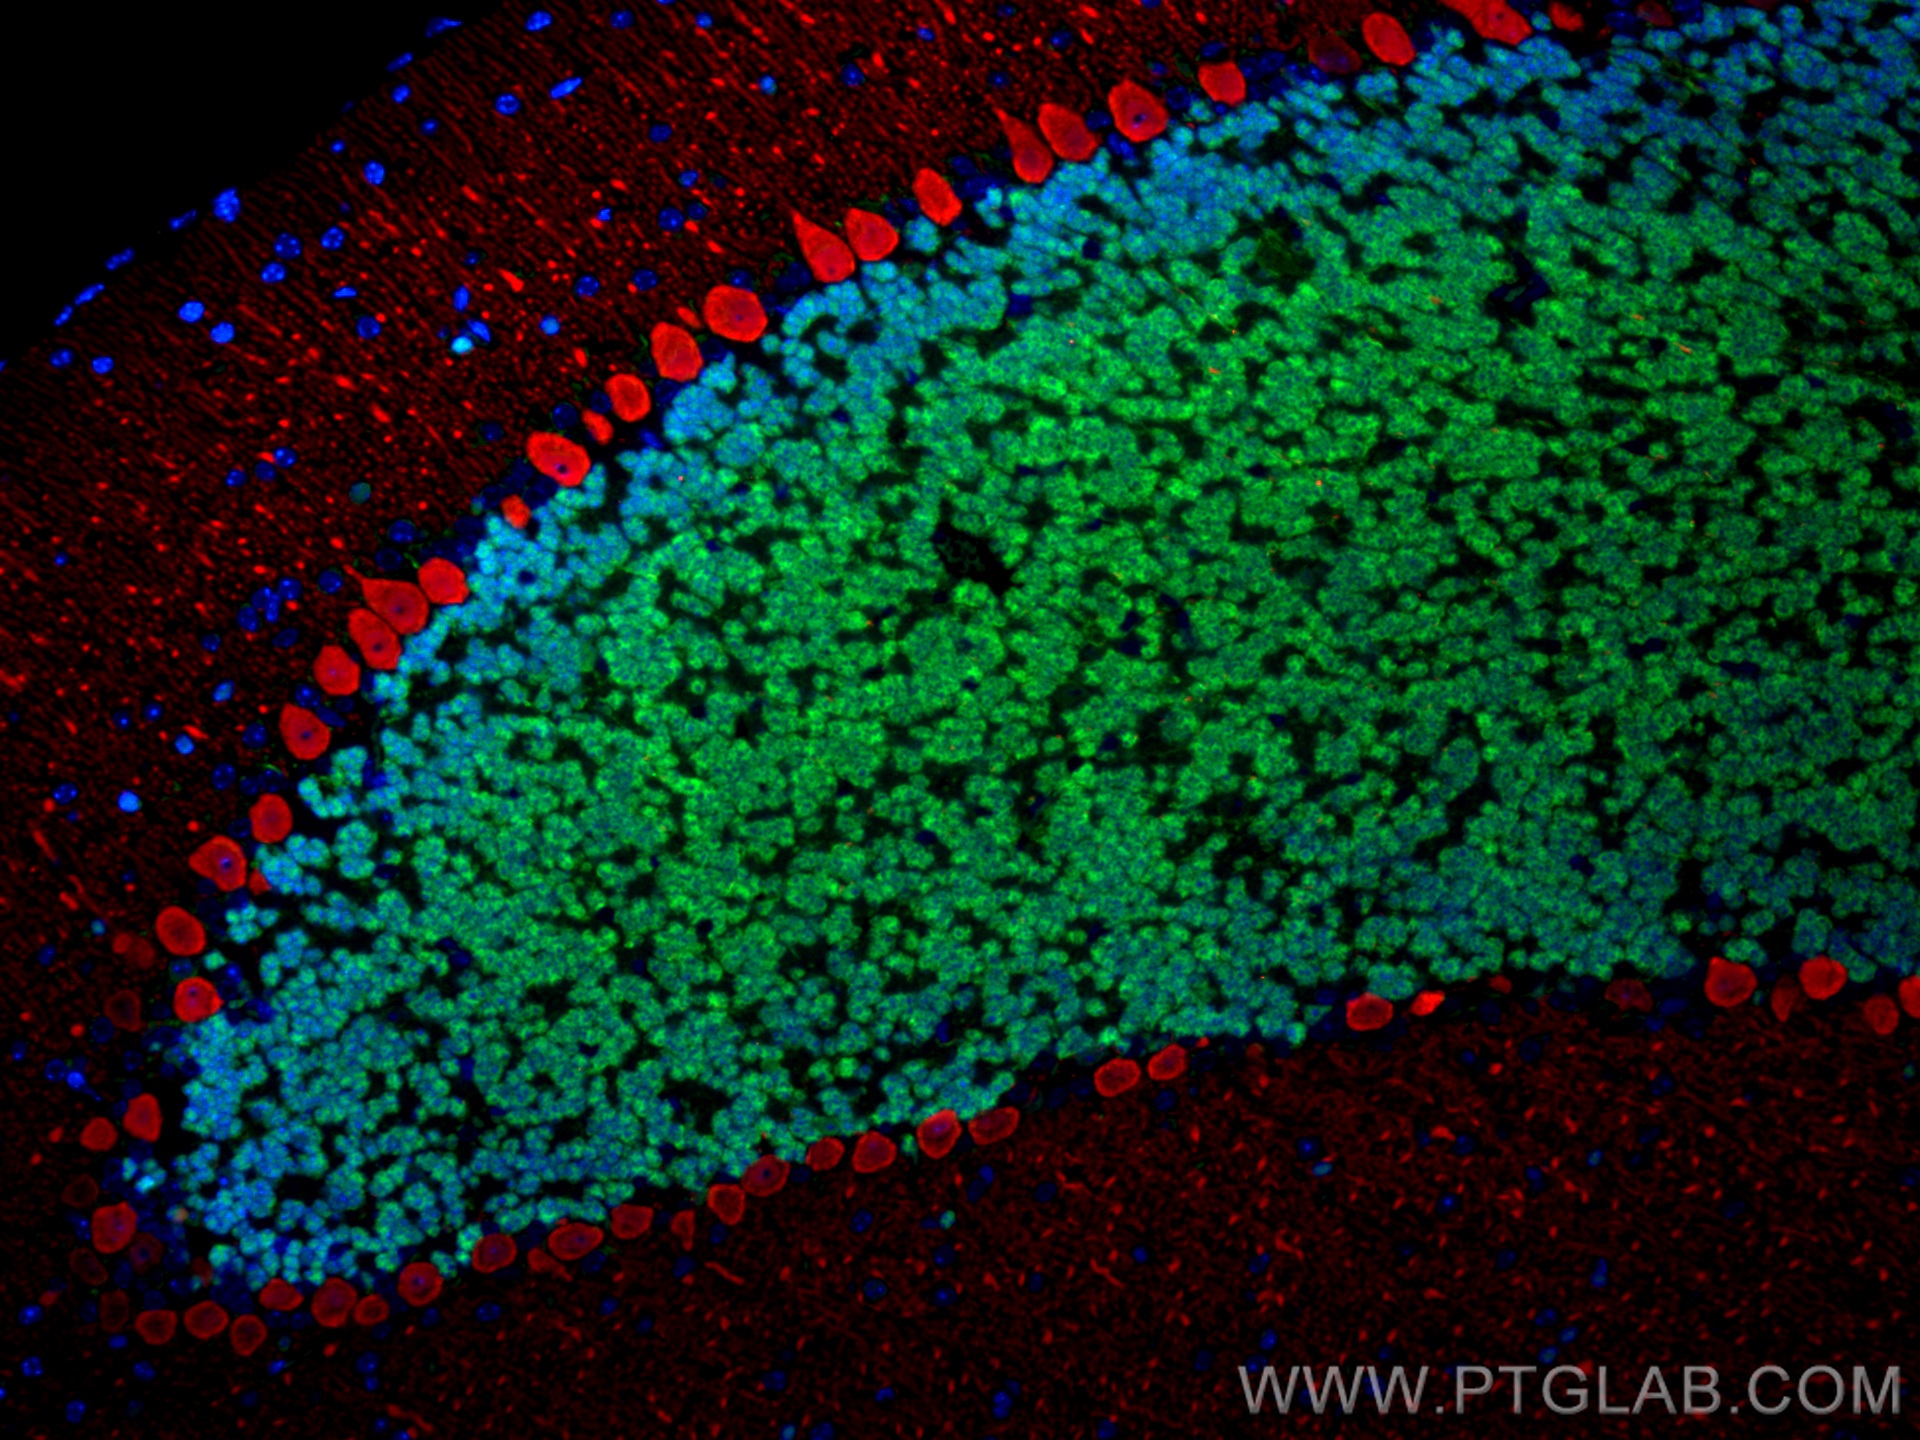 Immunofluorescence of mouse cerebellum: mouse cerebellum FFPE section was stained with Rabbit anti-NeuN polyclonal antibody (26975-1-AP, 1:200, green) and mouse anti-Calbindin-D28k monoclonal antibody (66394-1-Ig, 1:200, red). Multi-rAb CoraLite® Plus 488 conjugated Recombinant Goat anti-rabbit secondary antibody (RGAR002, 1:500) and Multi-rAb CoraLite® Plus 594 conjugated Goat Anti-Mouse Recombinant Secondary Antibody (H+L) were used for detection (RGAM004, 1:500) .